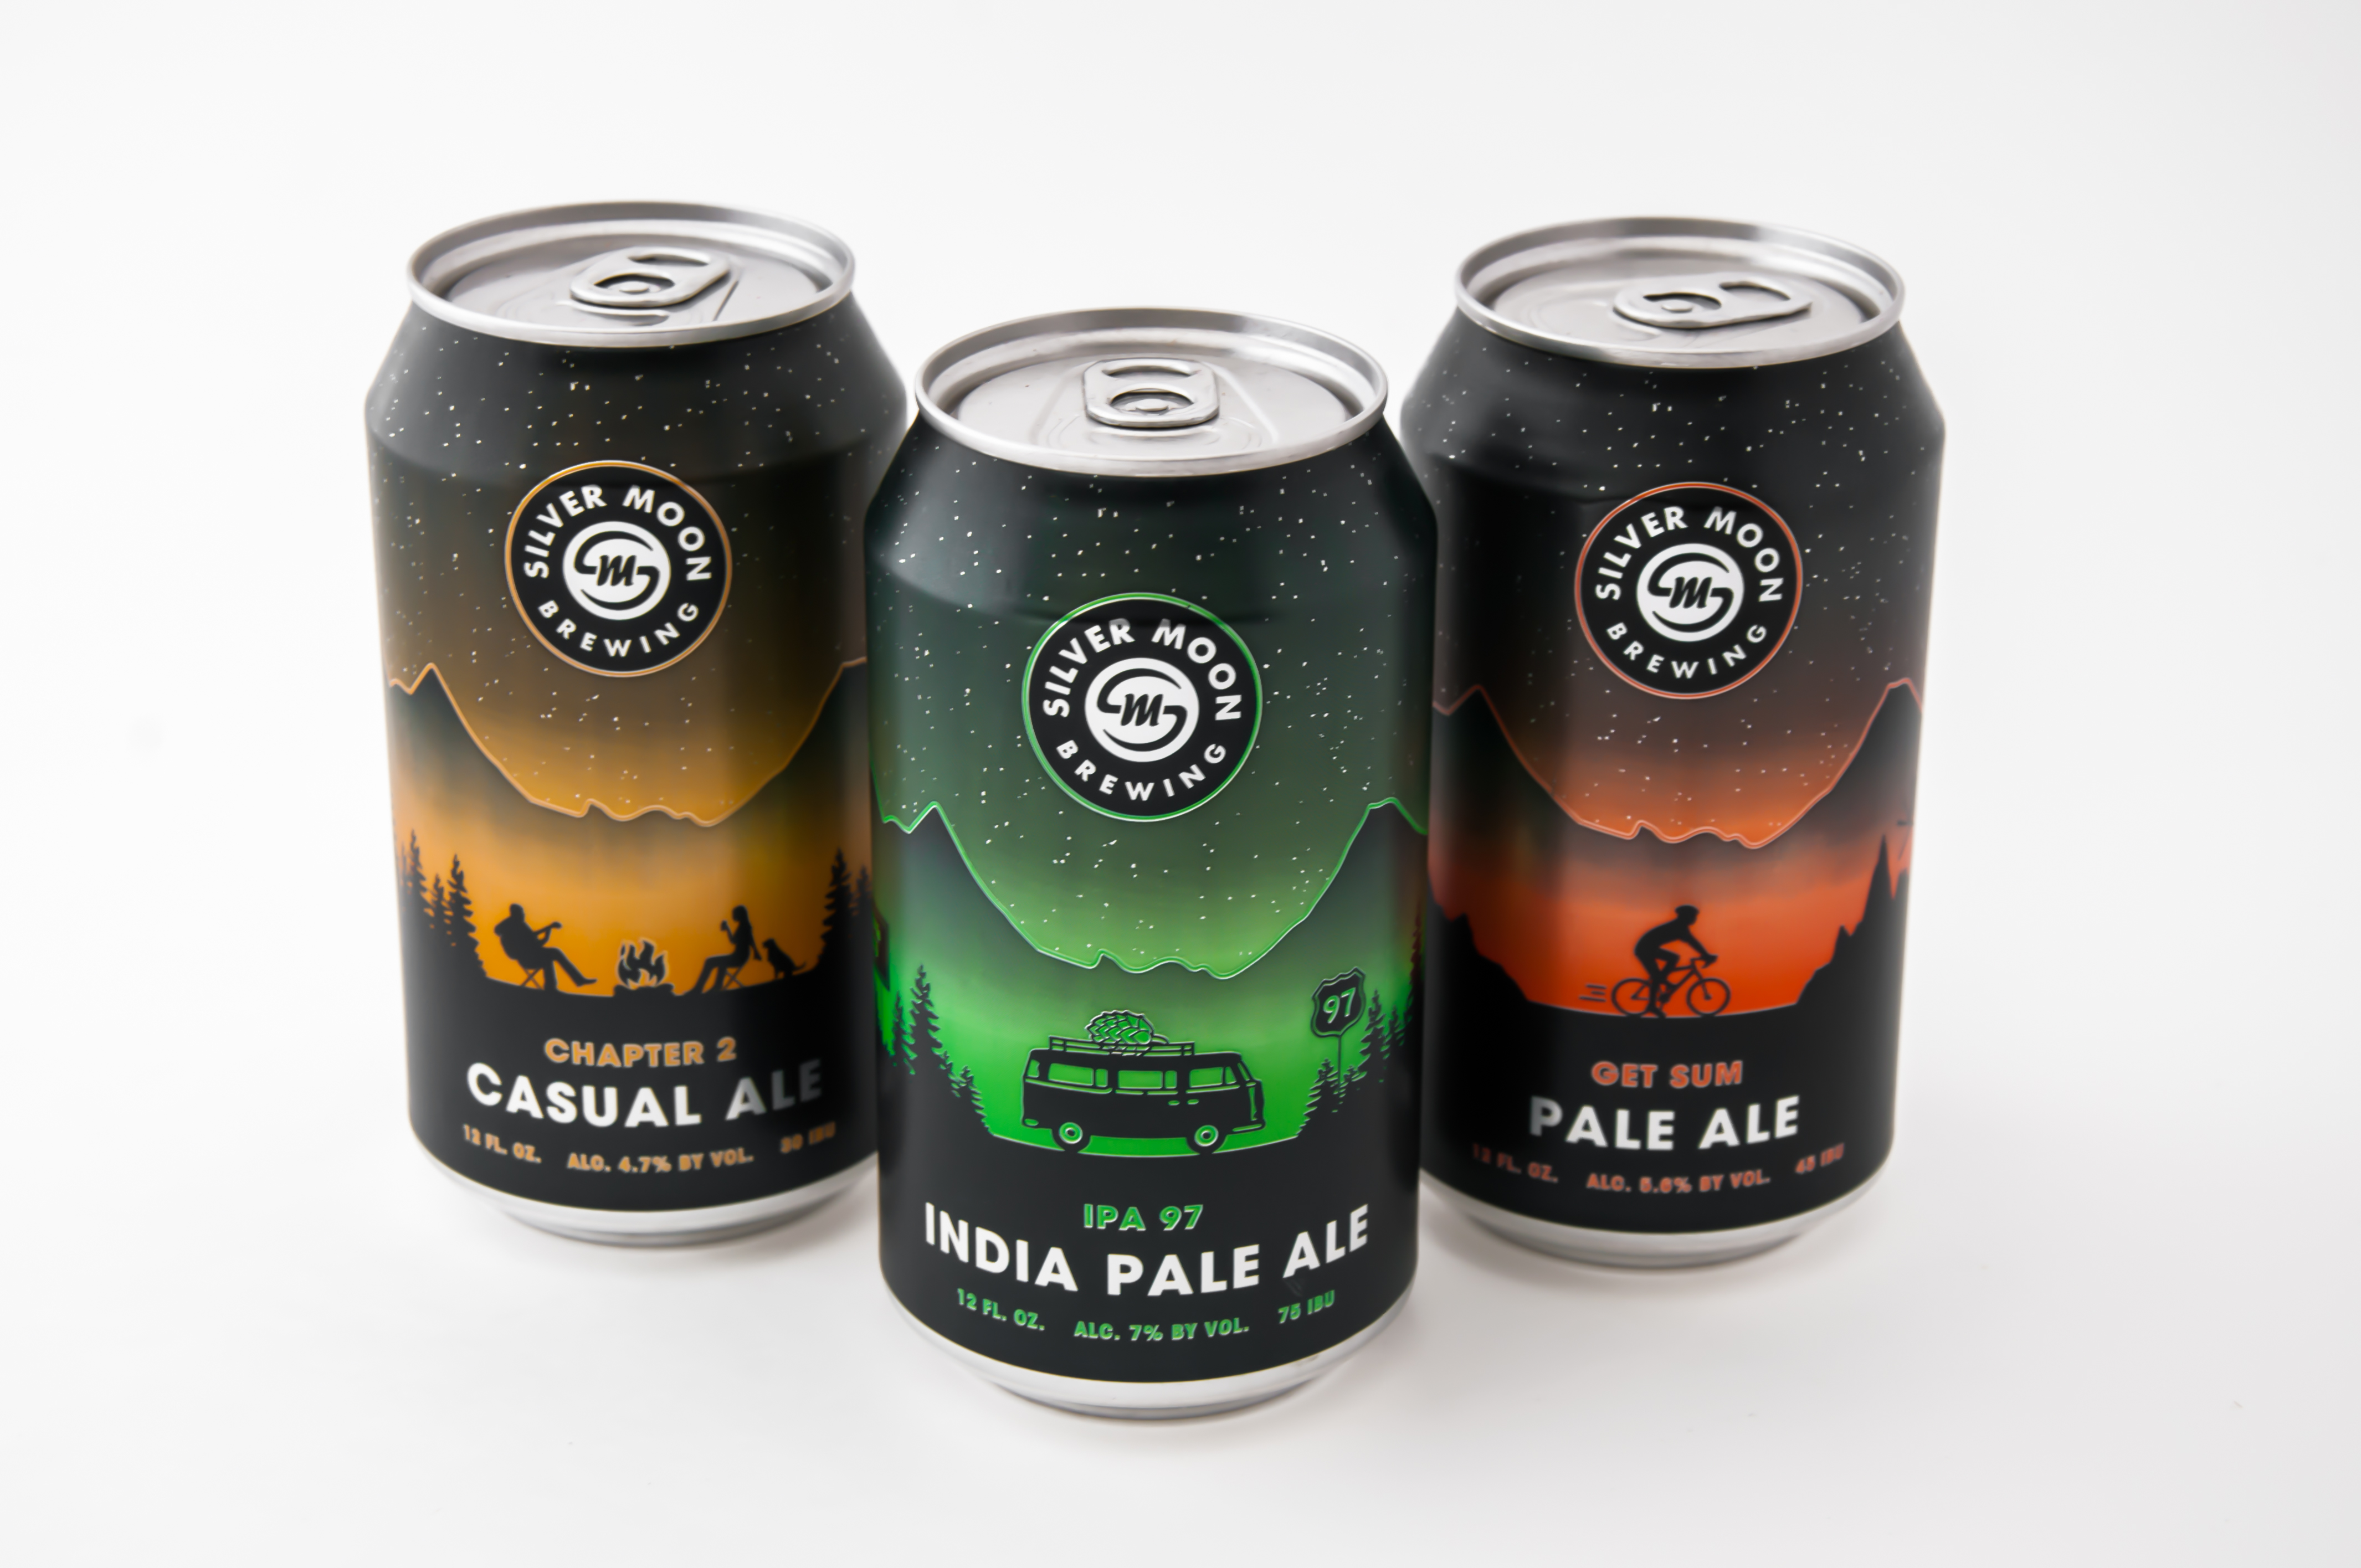 Silver Moon Brewing Can Lineup of Chapter 2 Casual Ale, IPA 97 India Pale Ale and Get Sum Pale Ale (image courtesy of Silver Moon Brewing)